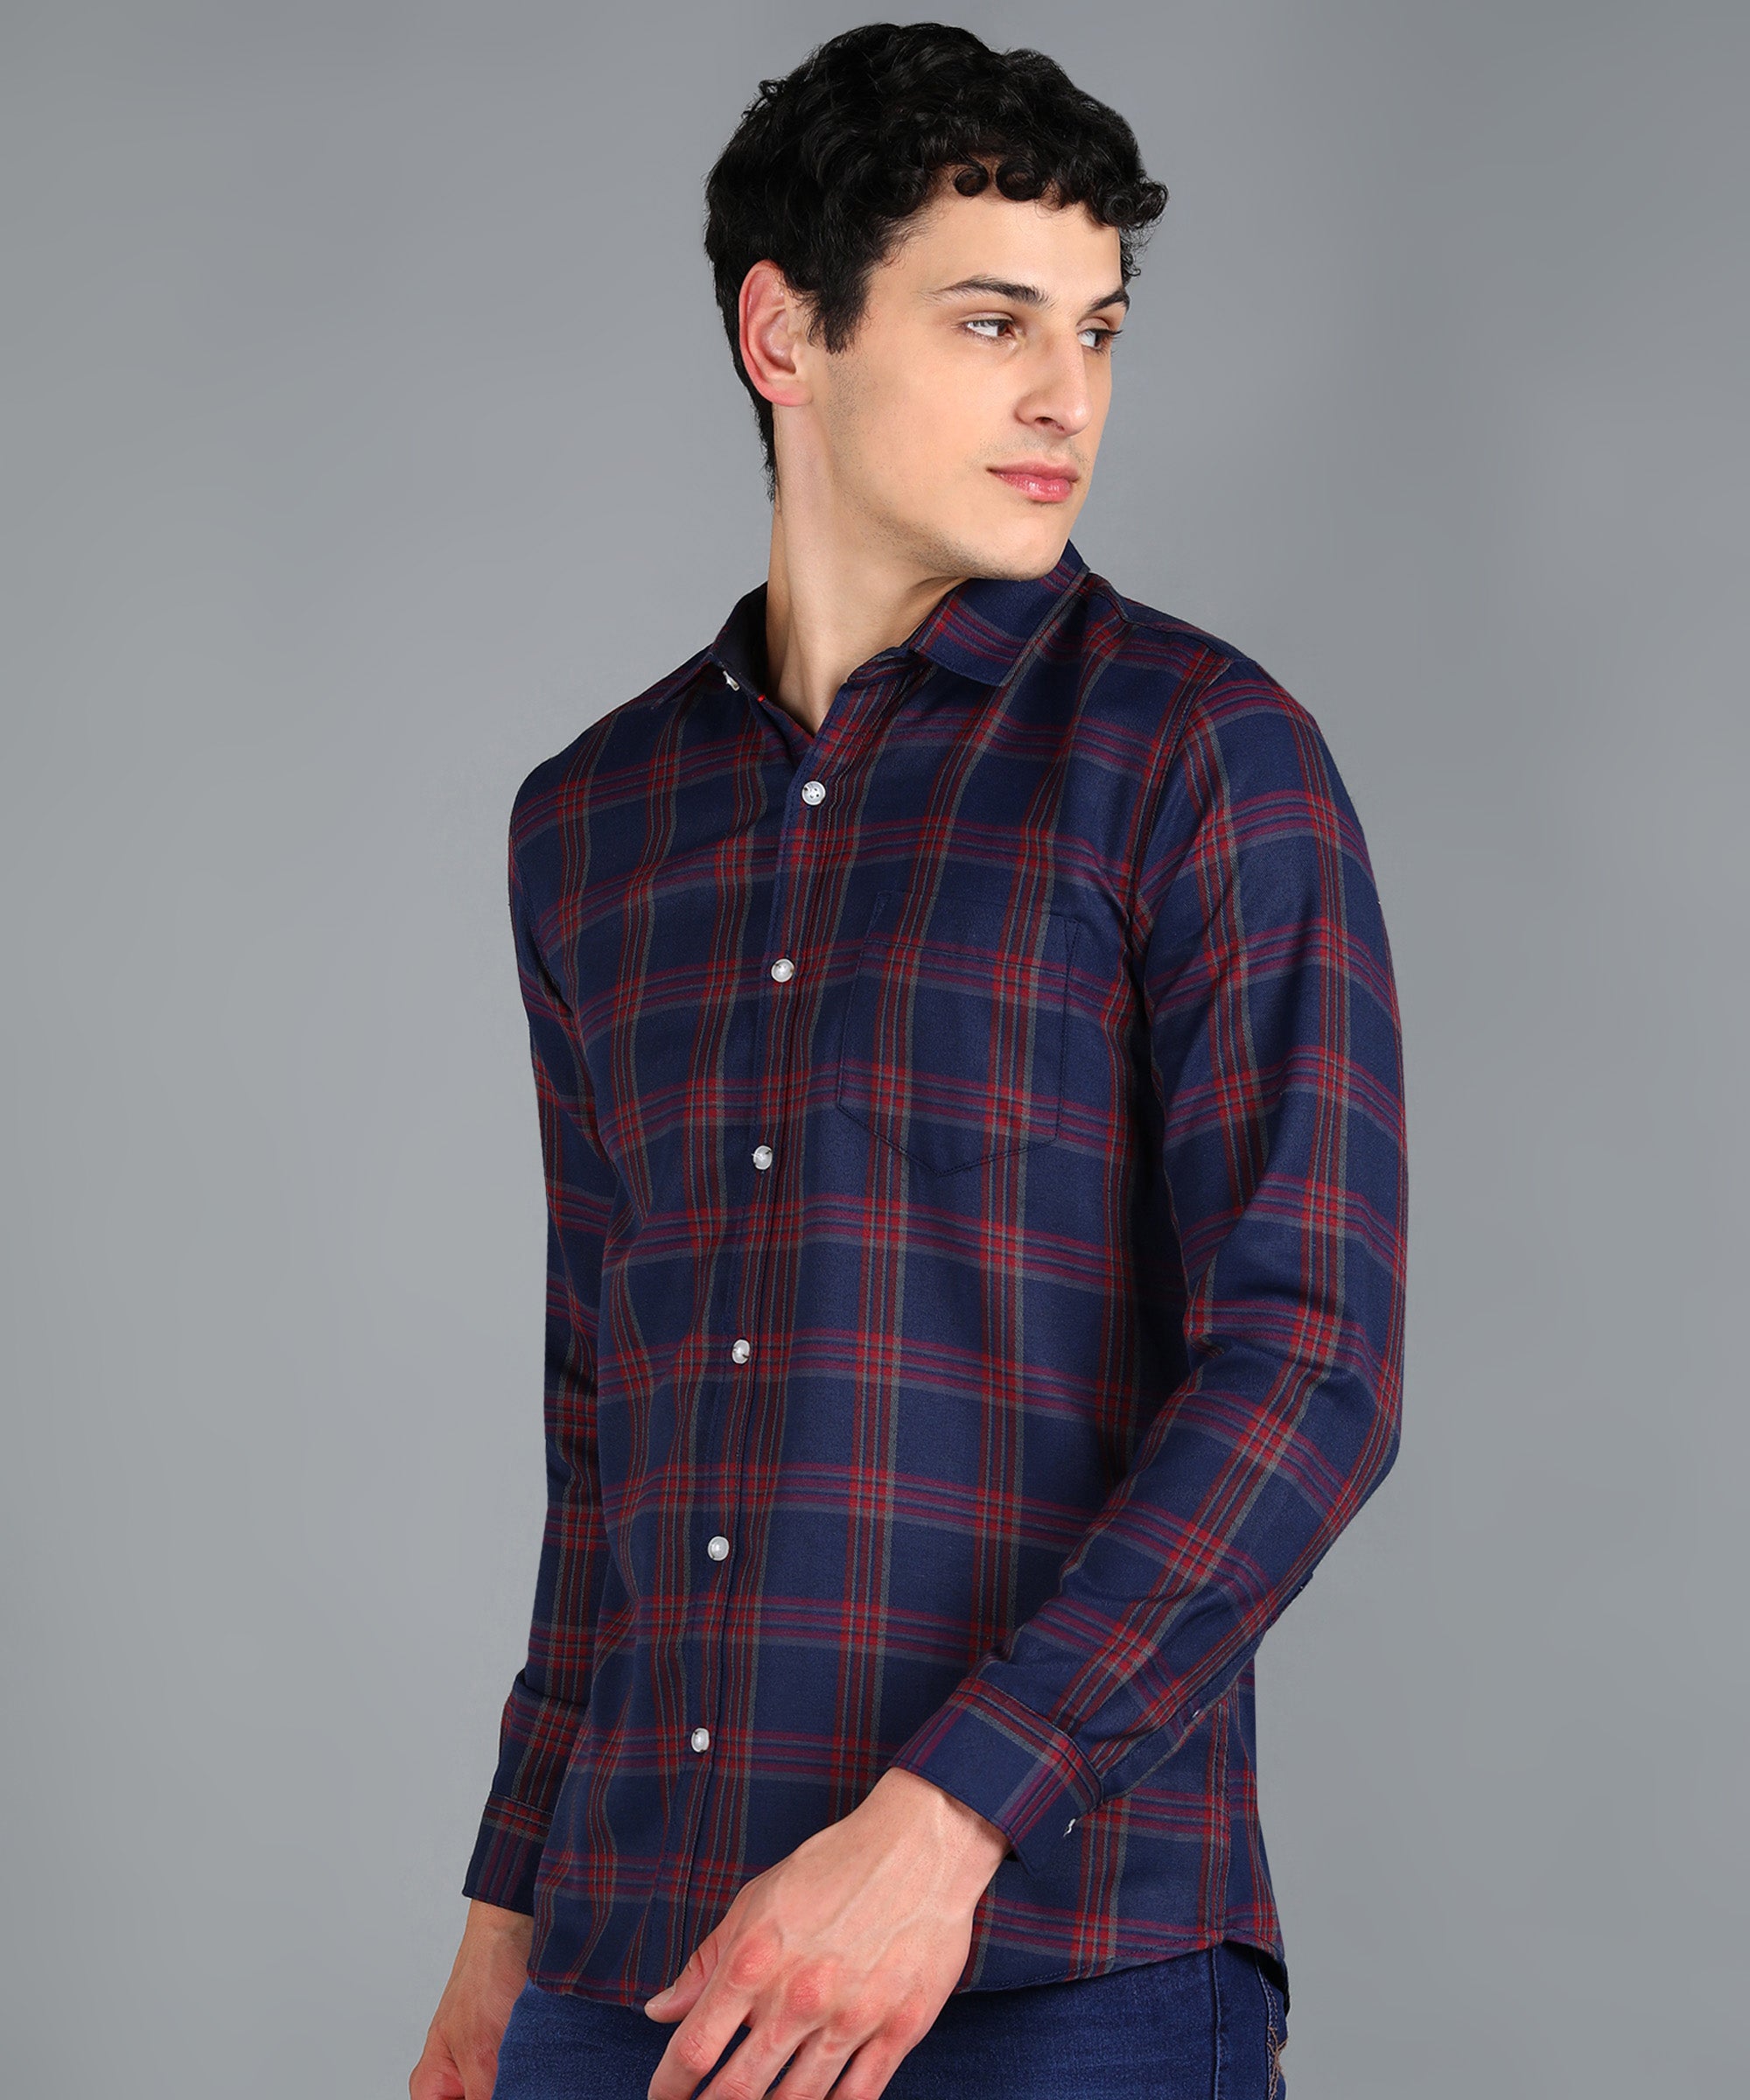 Men's Navy Blue Cotton Full Sleeve Slim Fit Casual Checkered Shirt